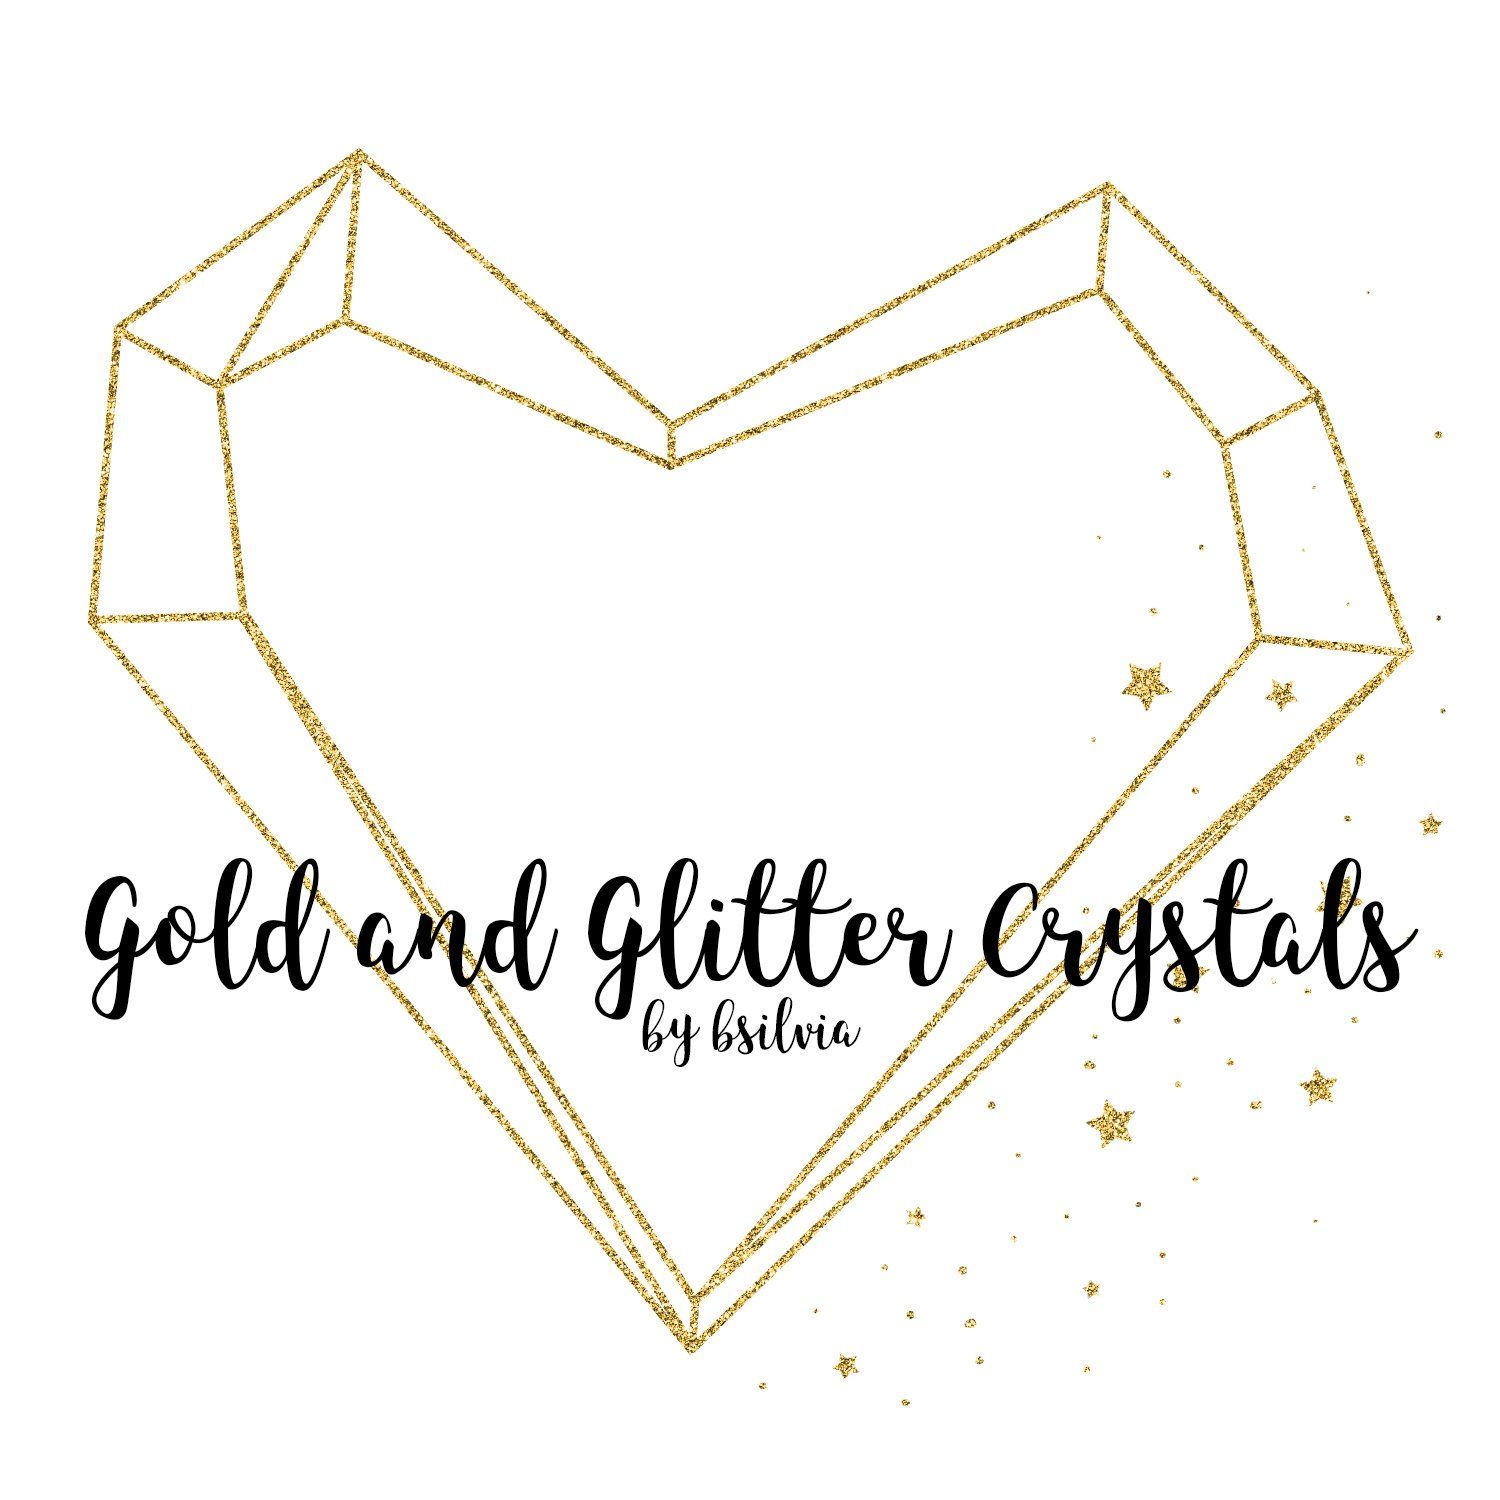 crystal clipart gold